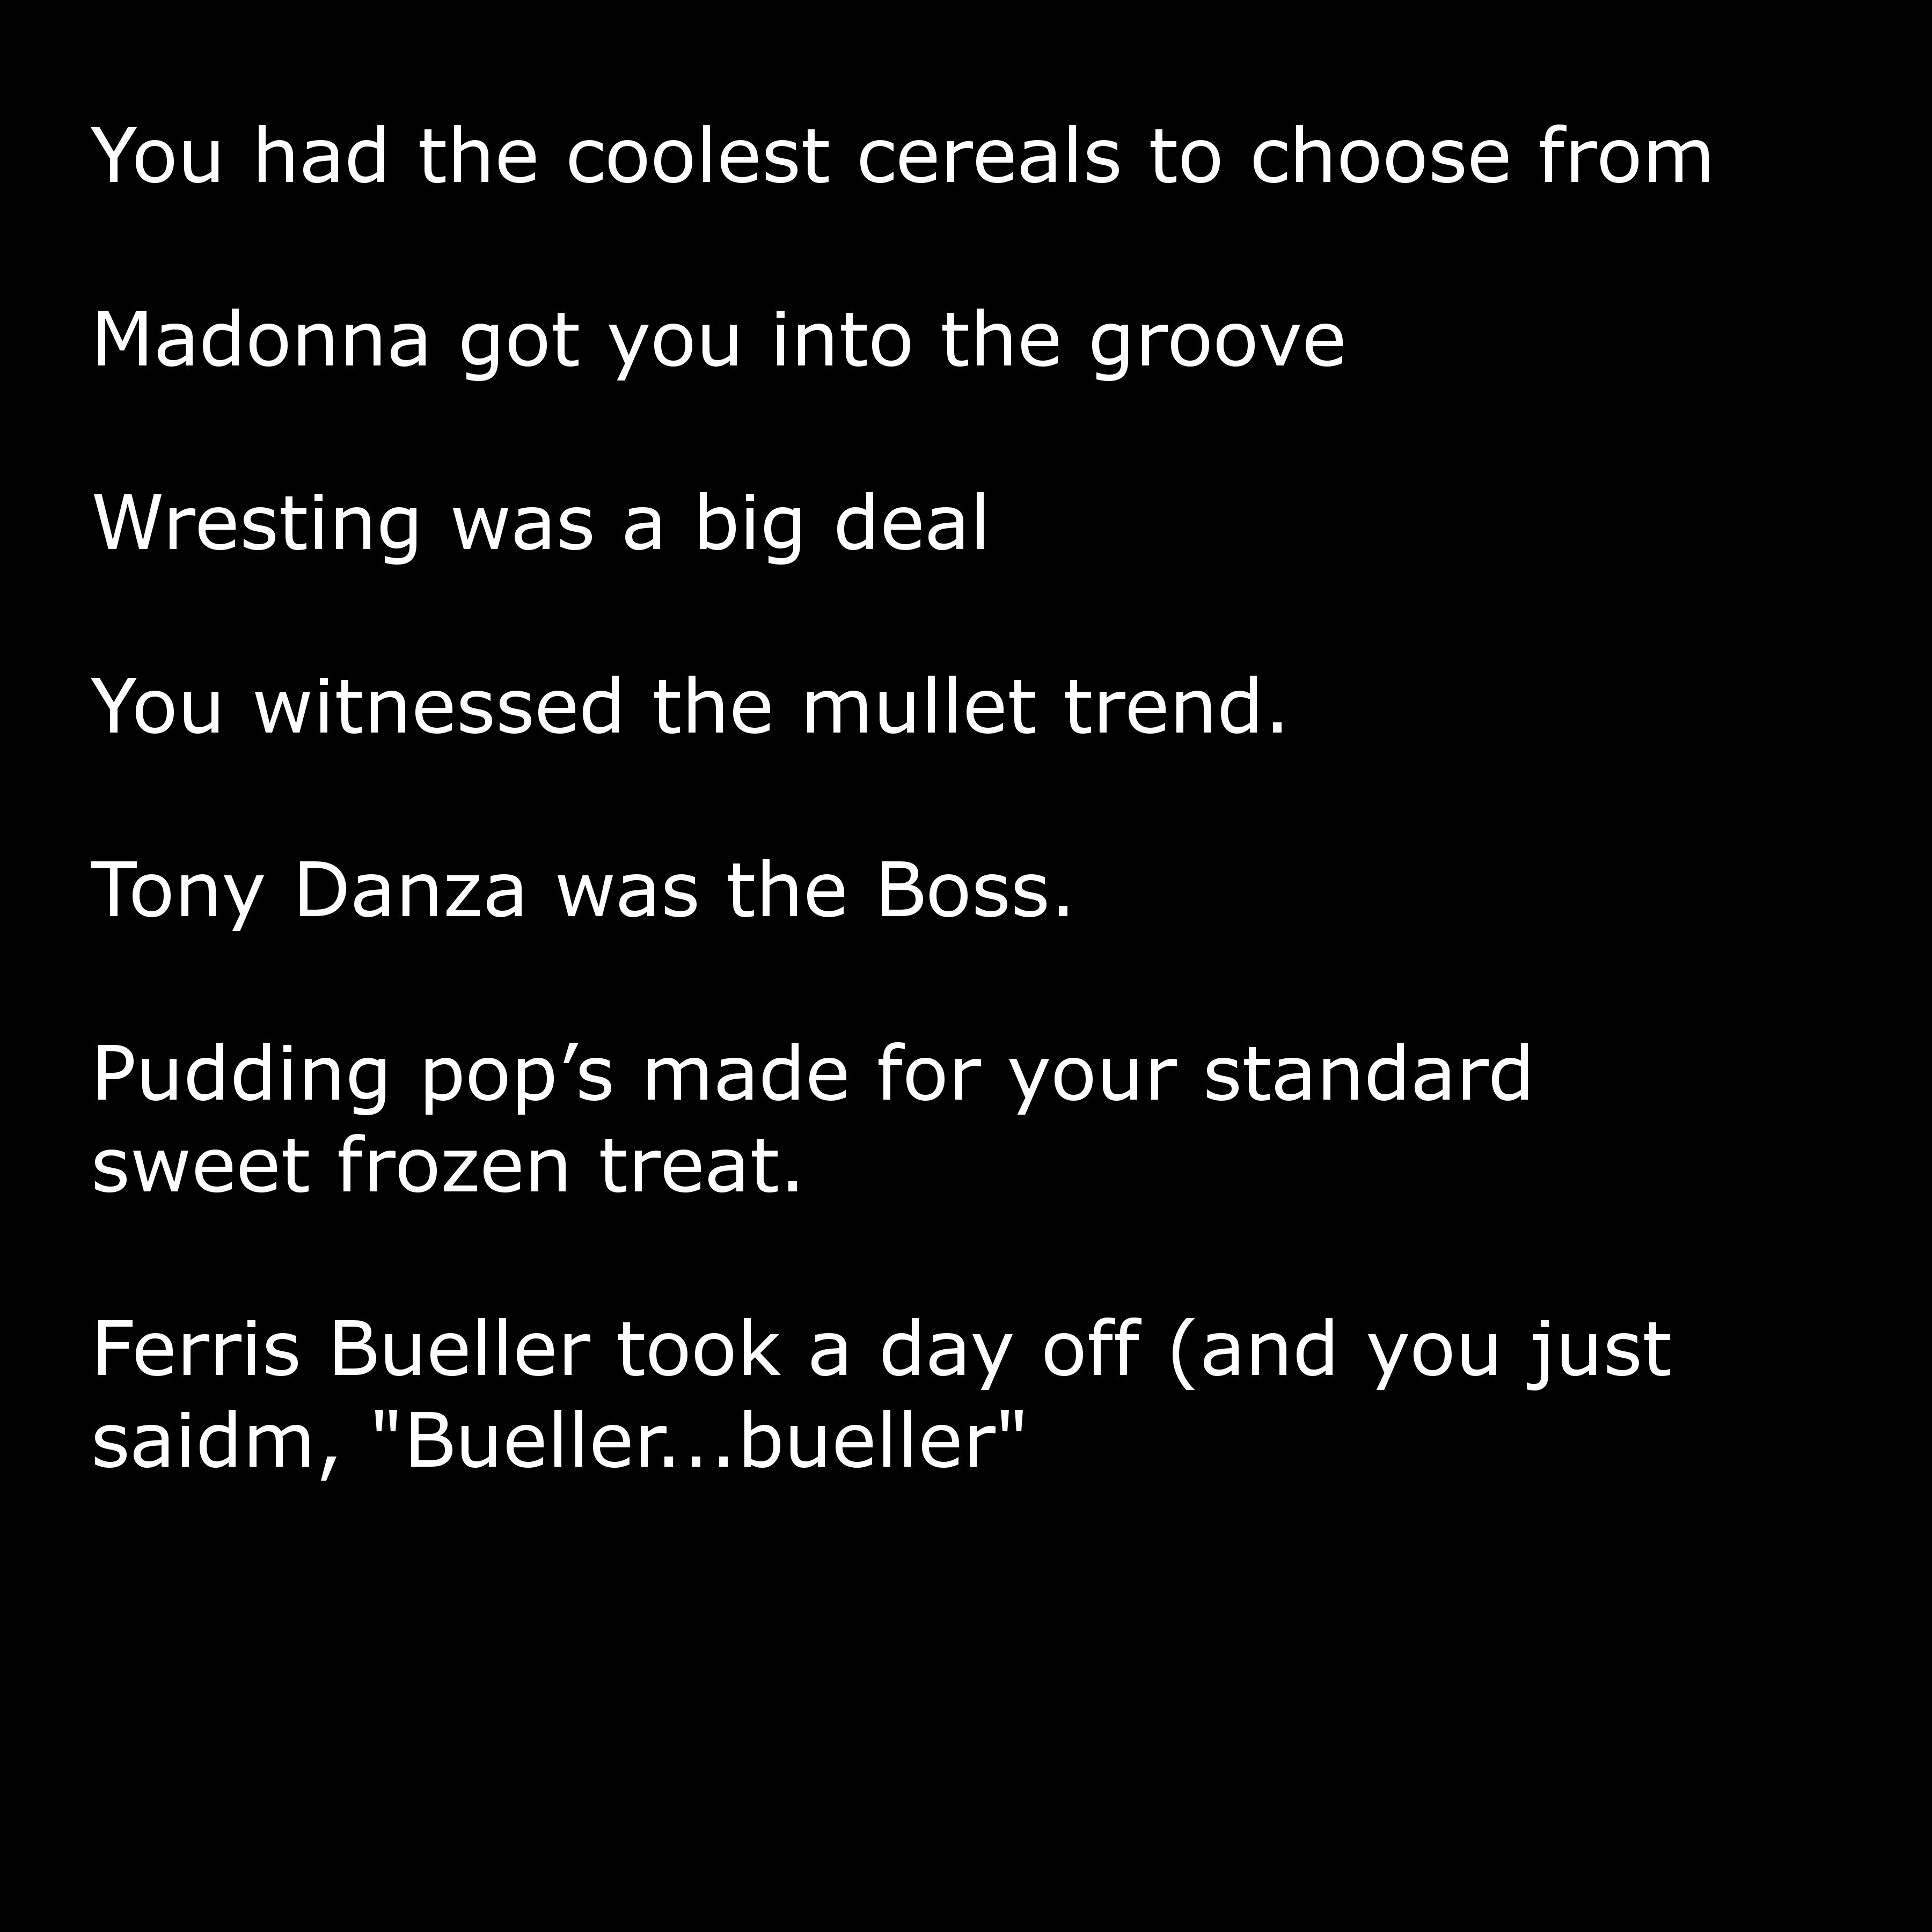 angle - You had the coolest cereals to choose from Madonna got you into the groove Wresting was a big deal You witnessed the mullet trend. Tony Danza was the Boss. Pudding pop's made for your standard sweet frozen treat. Ferris Bueller took a day off and 